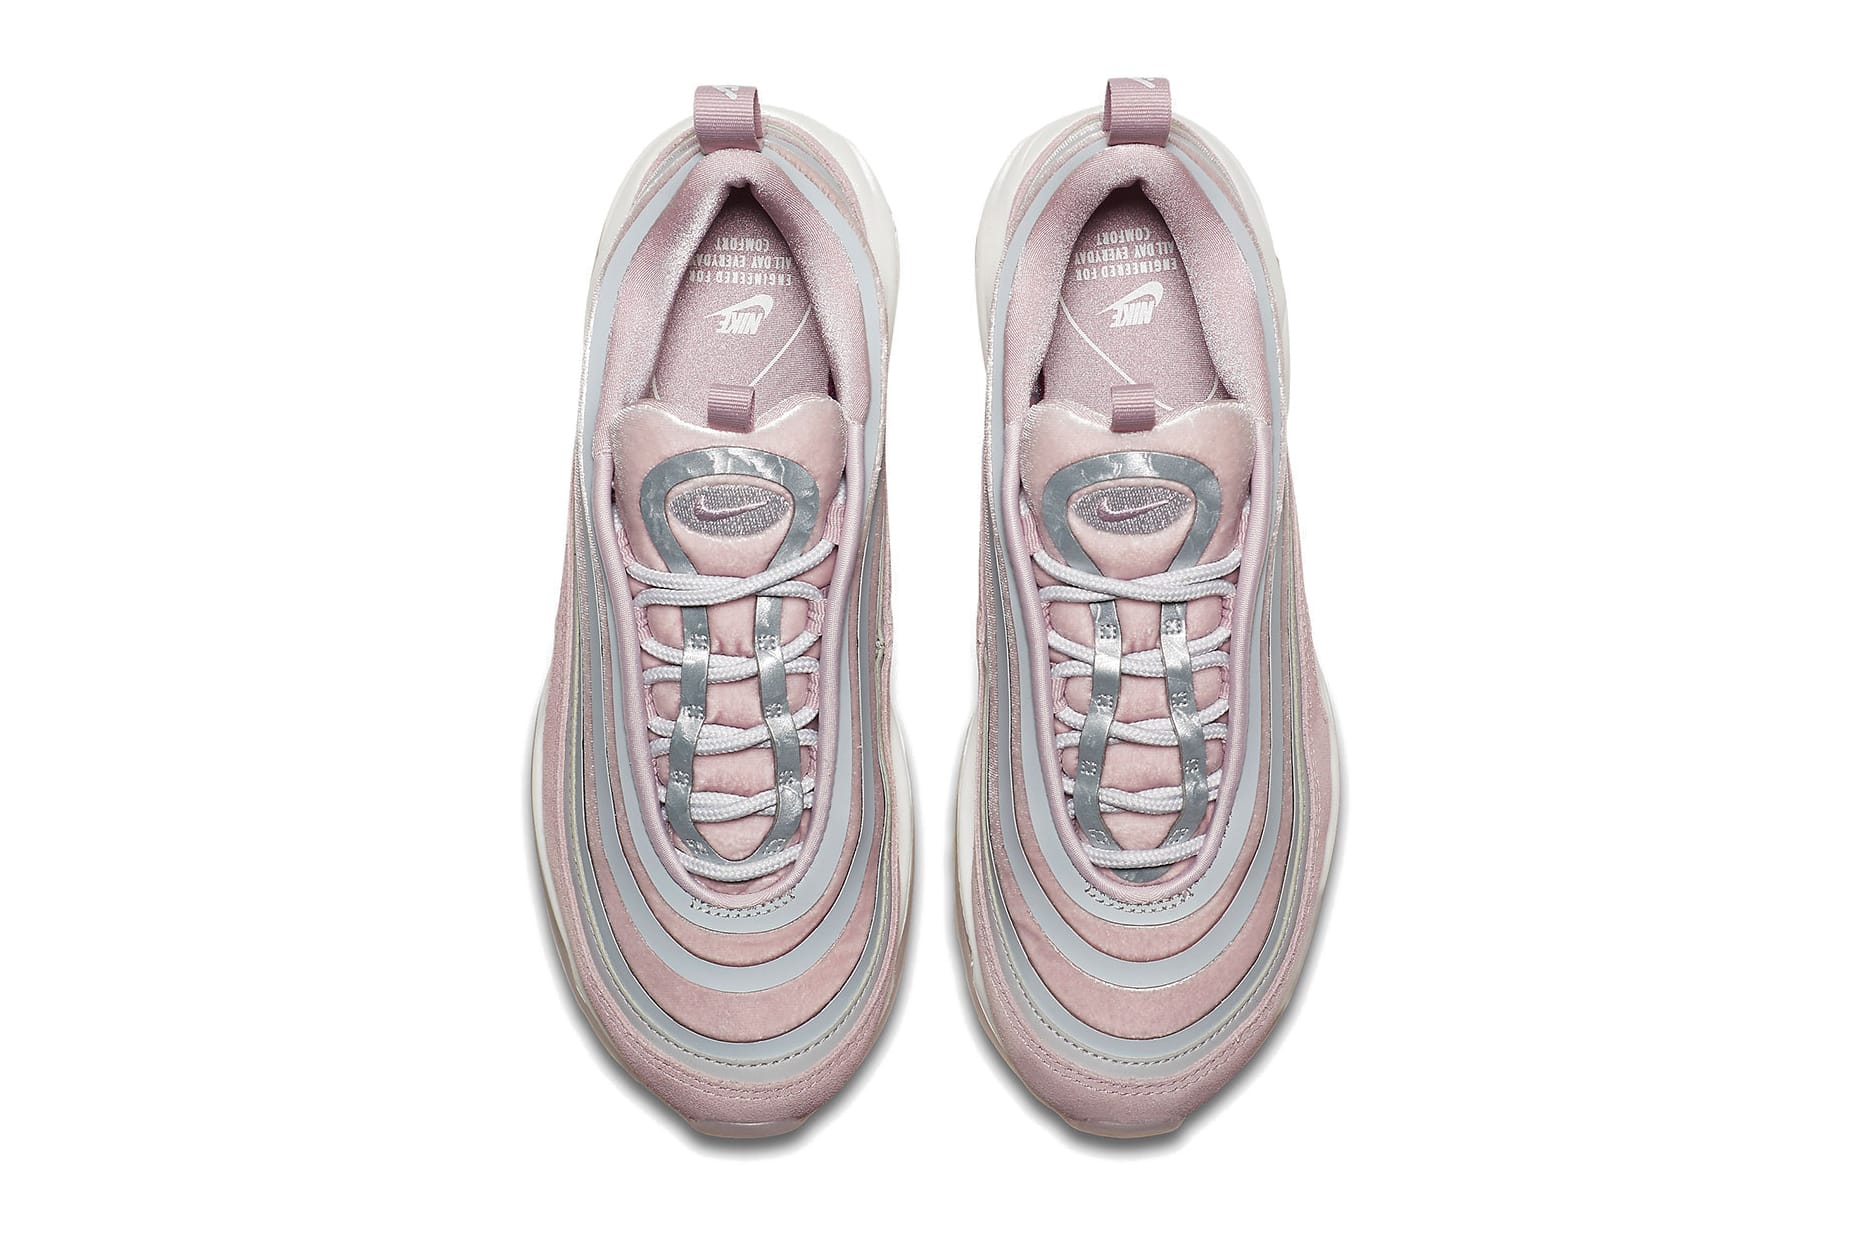 Nike's Air Max 97 Drops in a Rosy Pink 